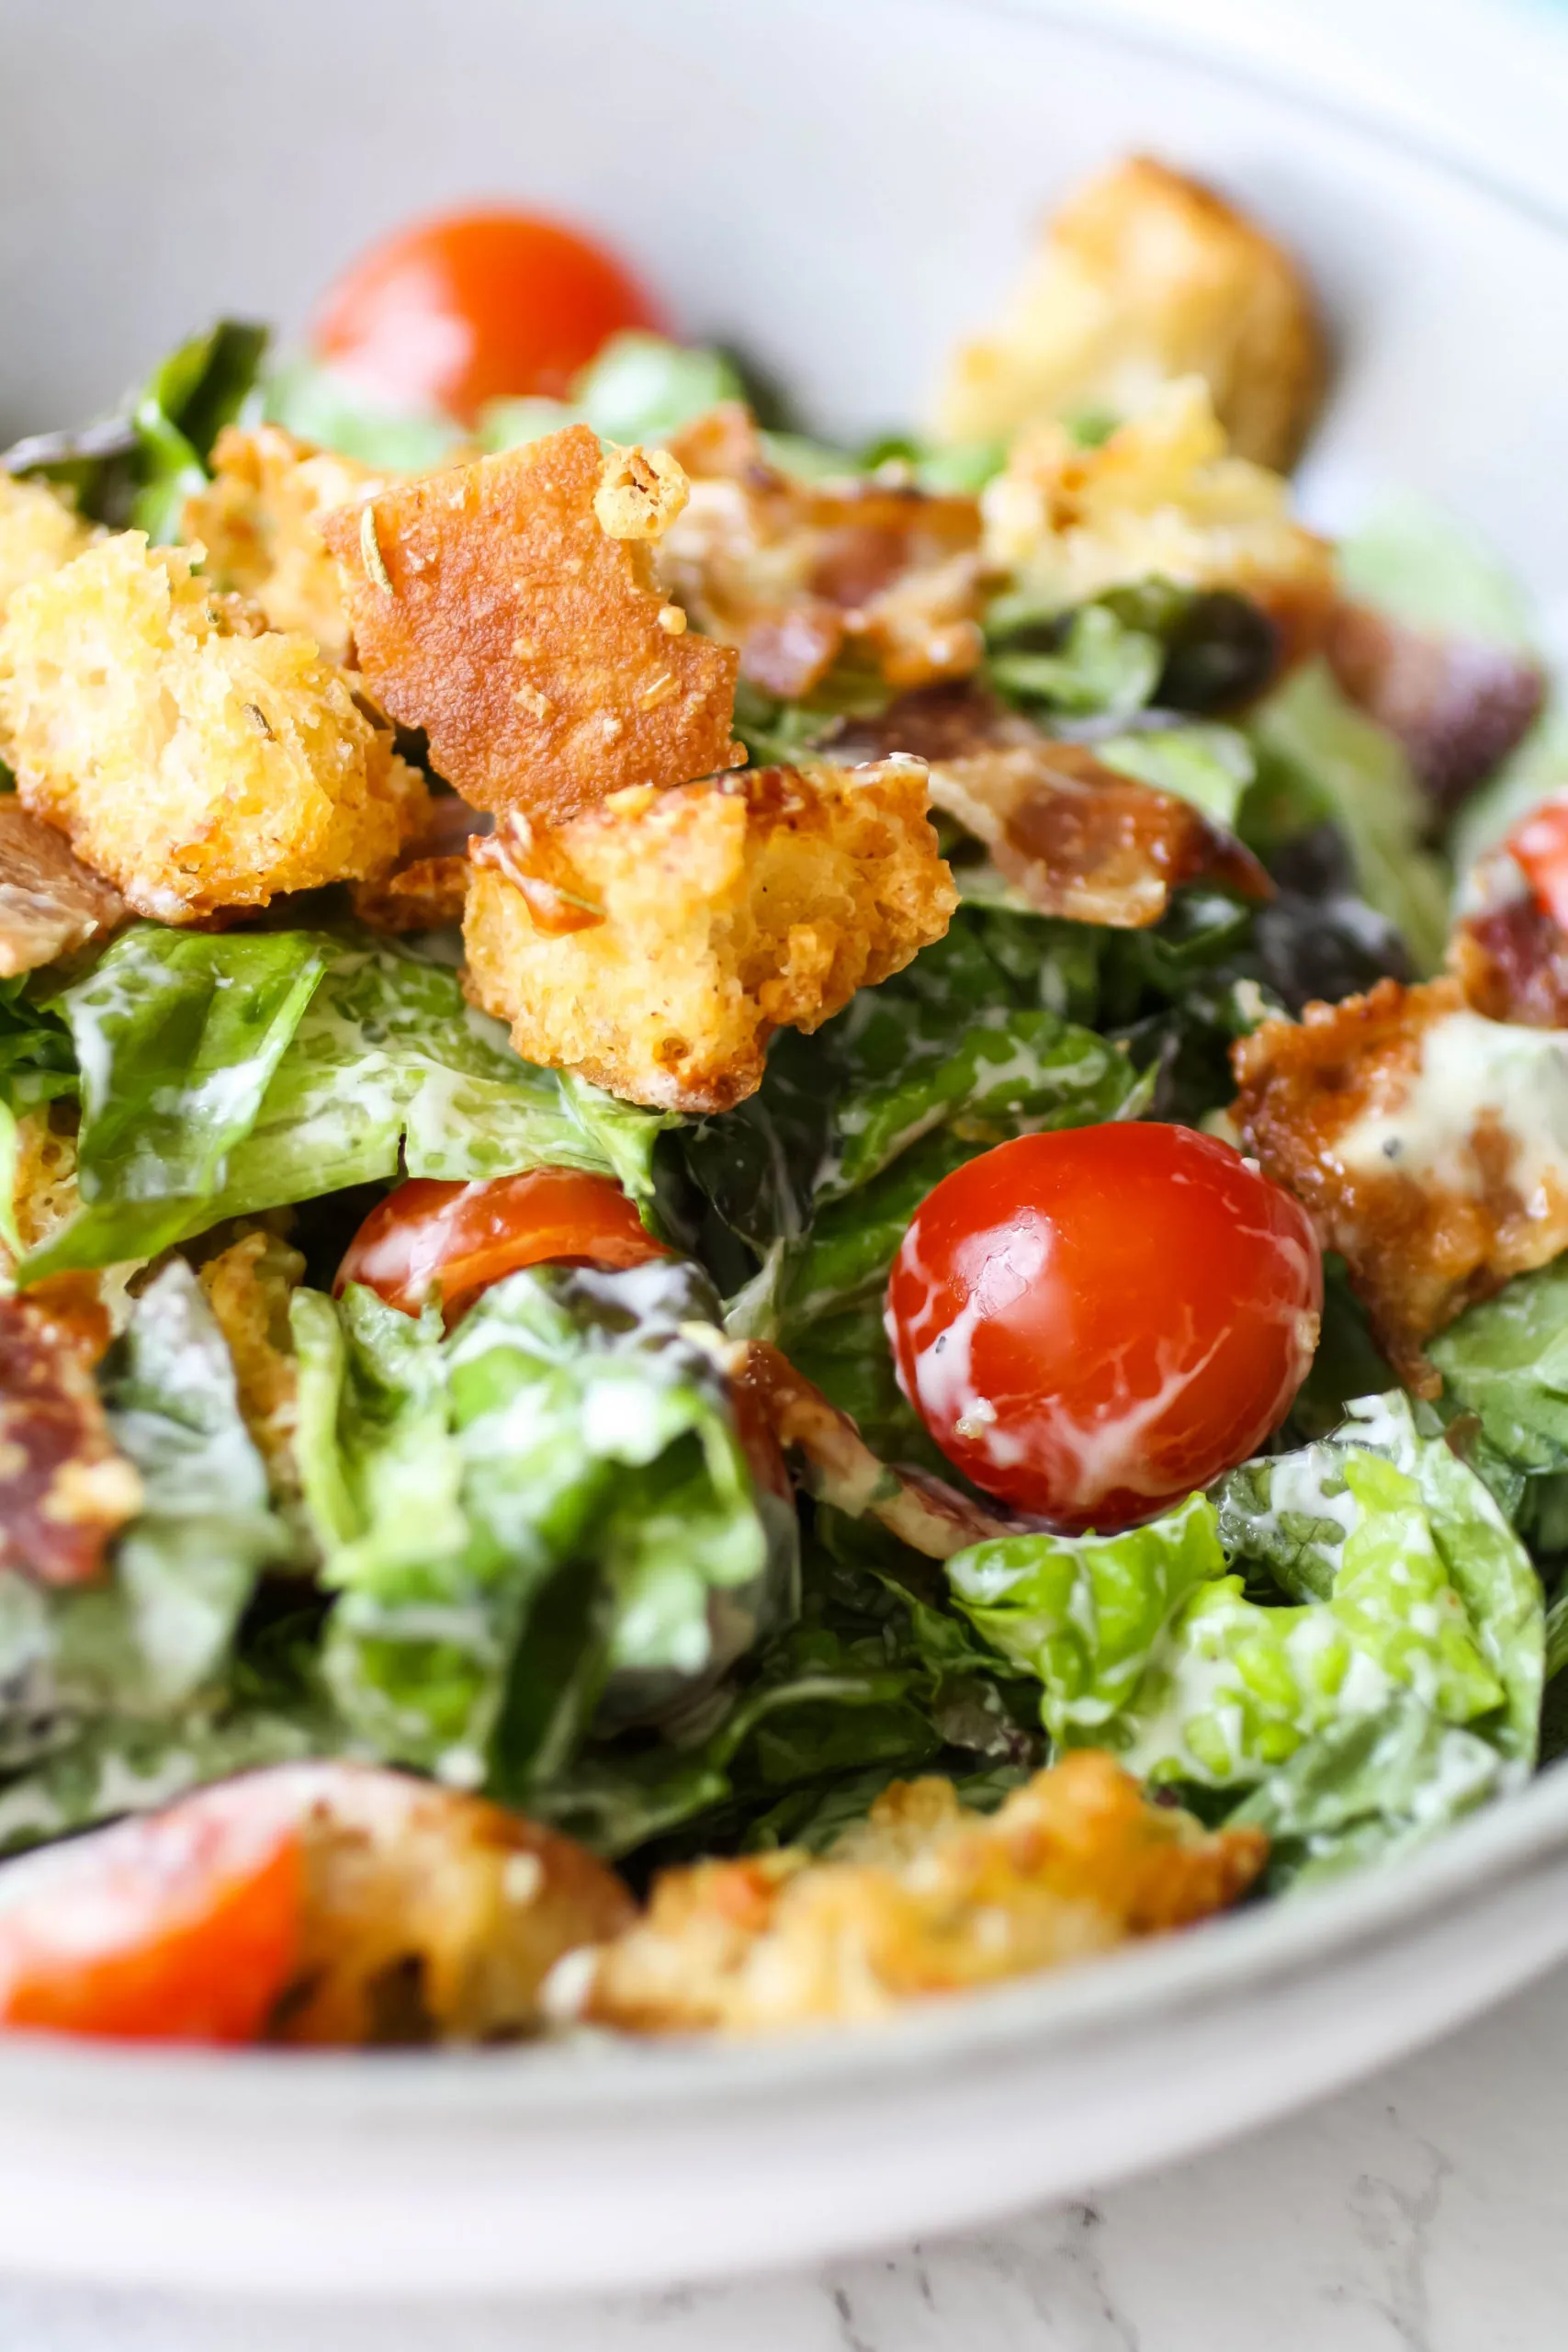 Dig in to this BLT Salad with Garlic-Basil Dressing